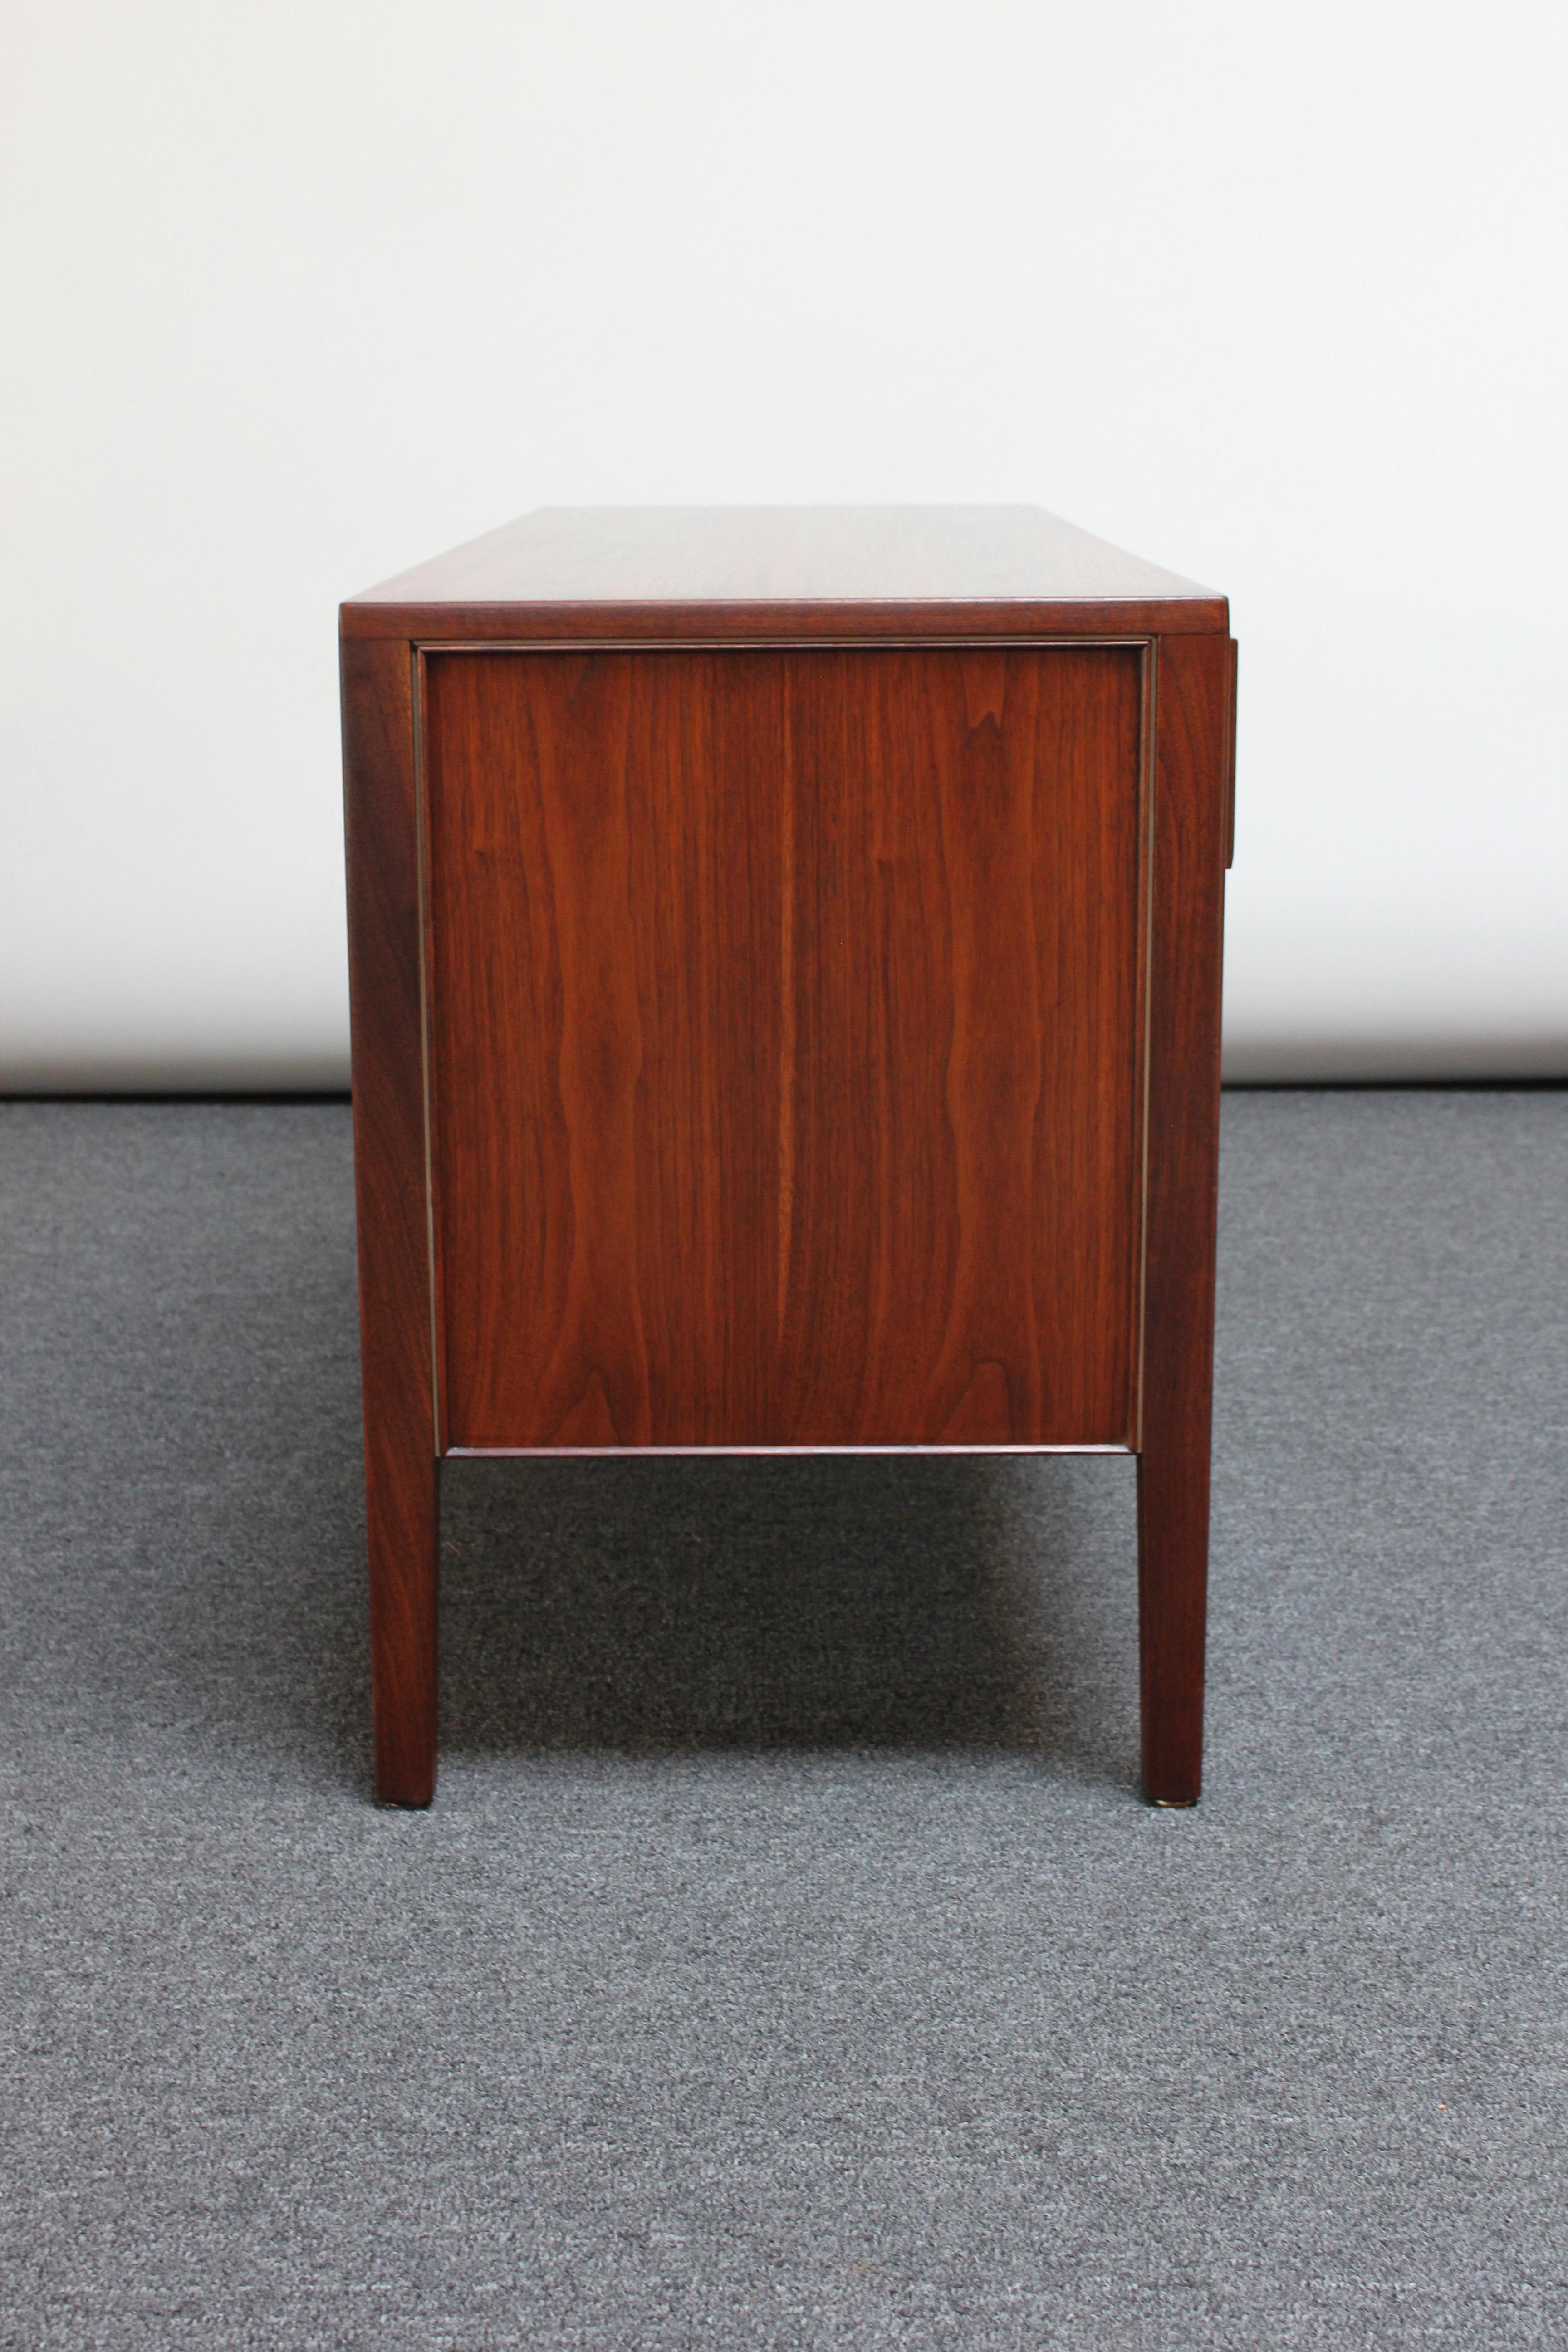 Metal Petite Mid-Century Walnut Credenza / Dual Filing Cabinet by Stow Davis